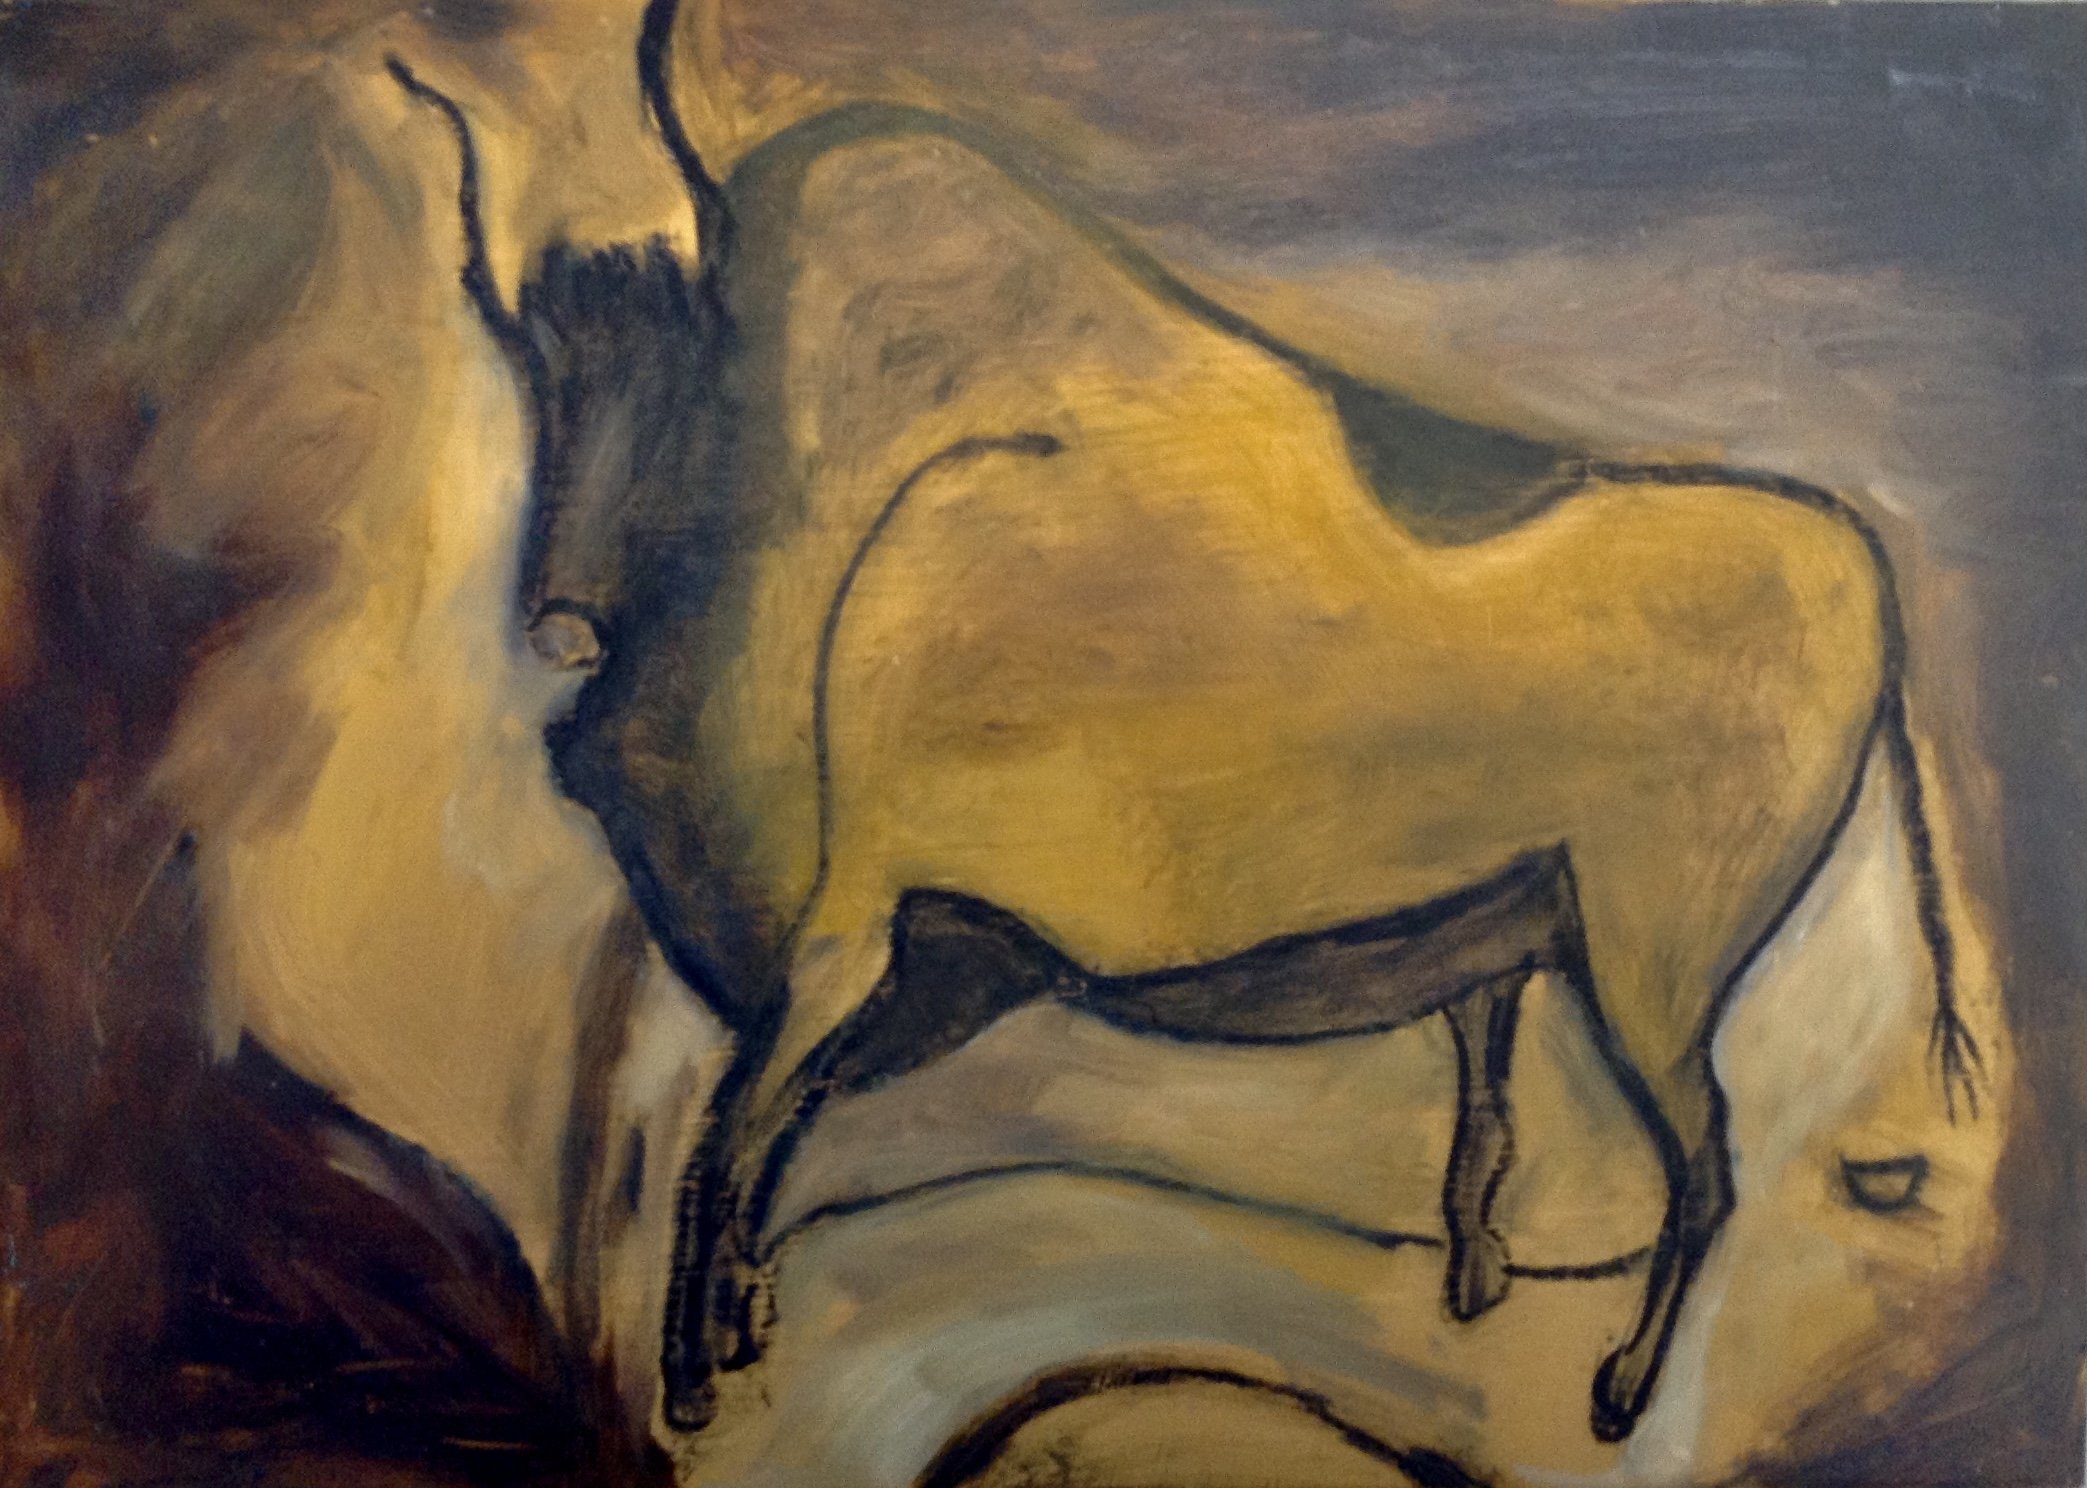    Ochre Bison  - oil on board, 14-inches x 10-inches SOLD  